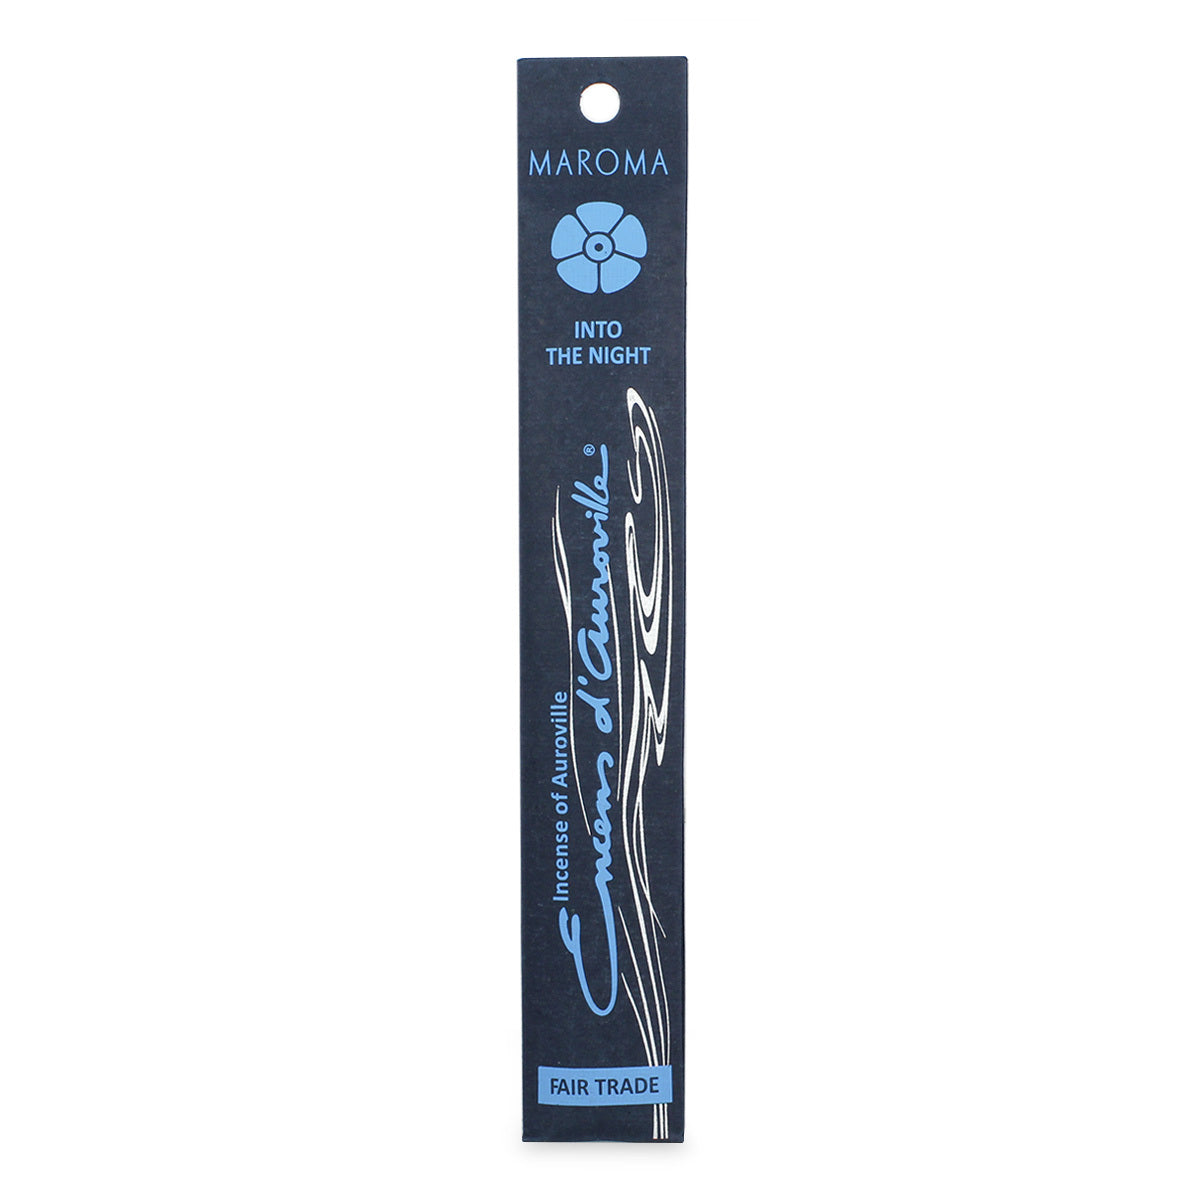 Primary image of Into the Night Incense